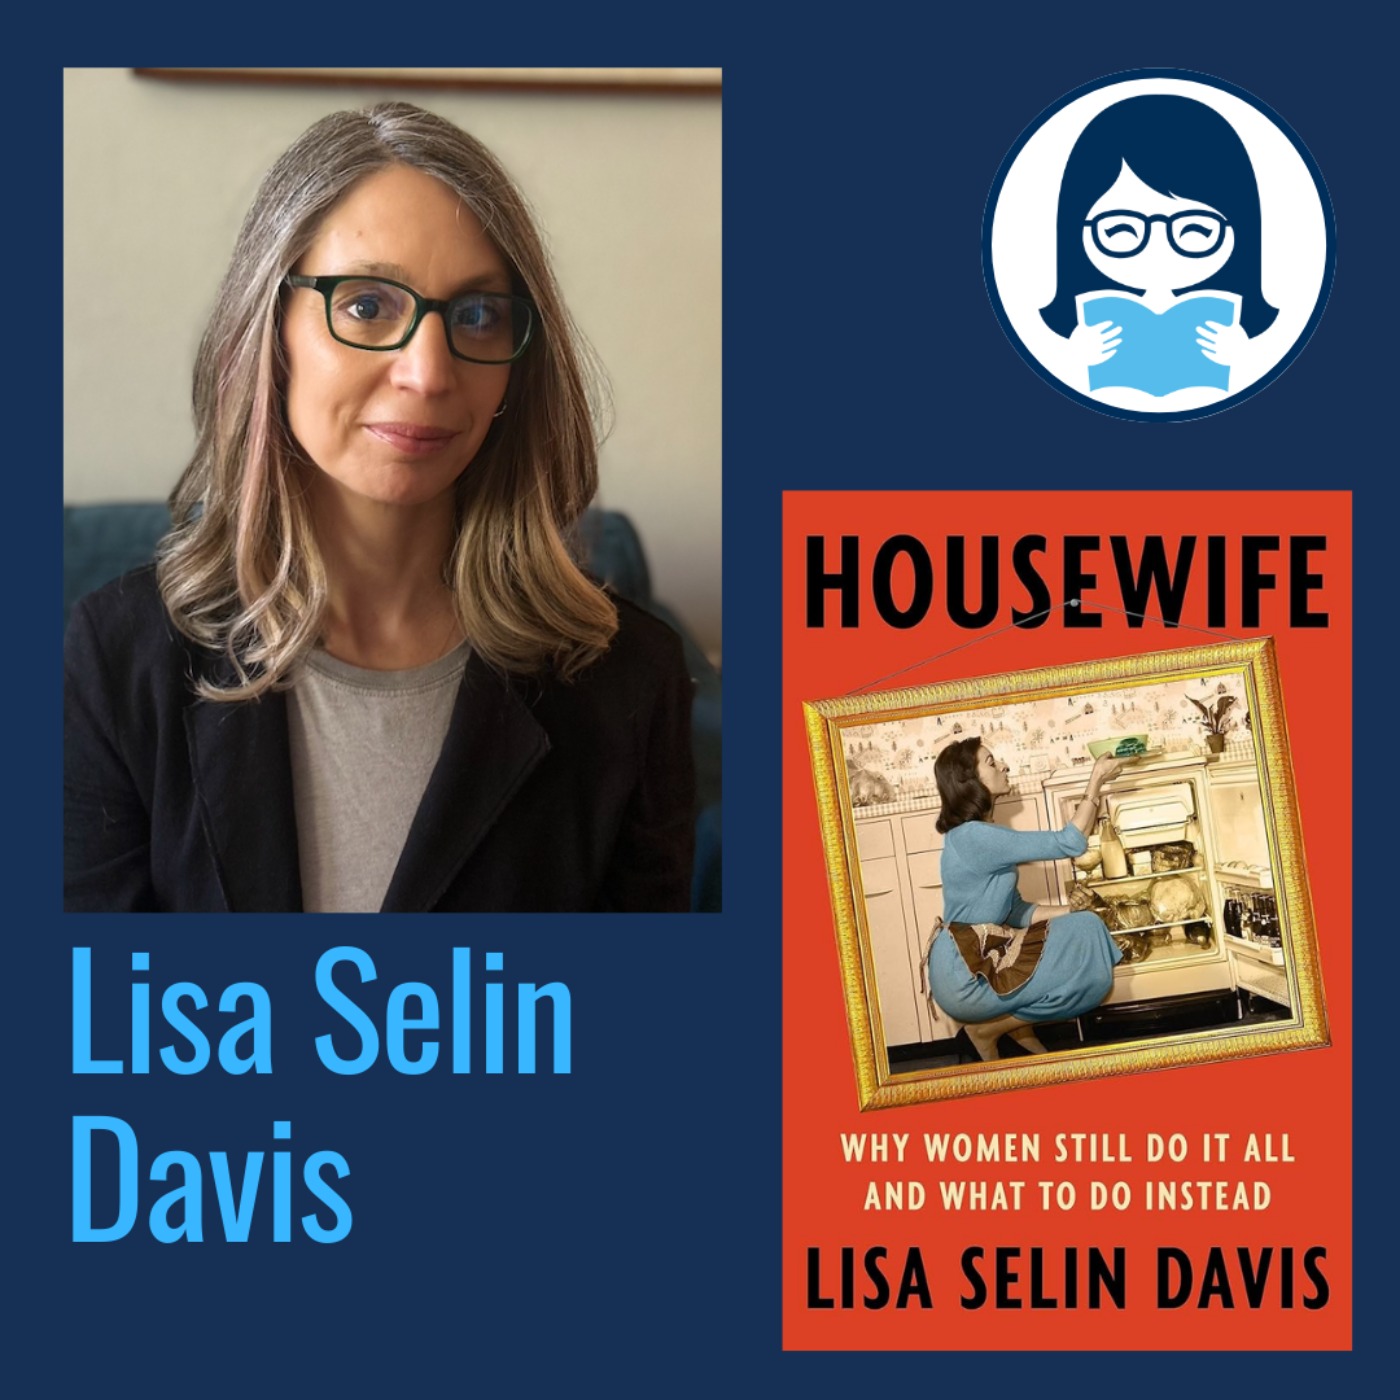 Lisa Selin Davis, HOUSEWIFE: Why Women Still Do It All and What to Do Instead